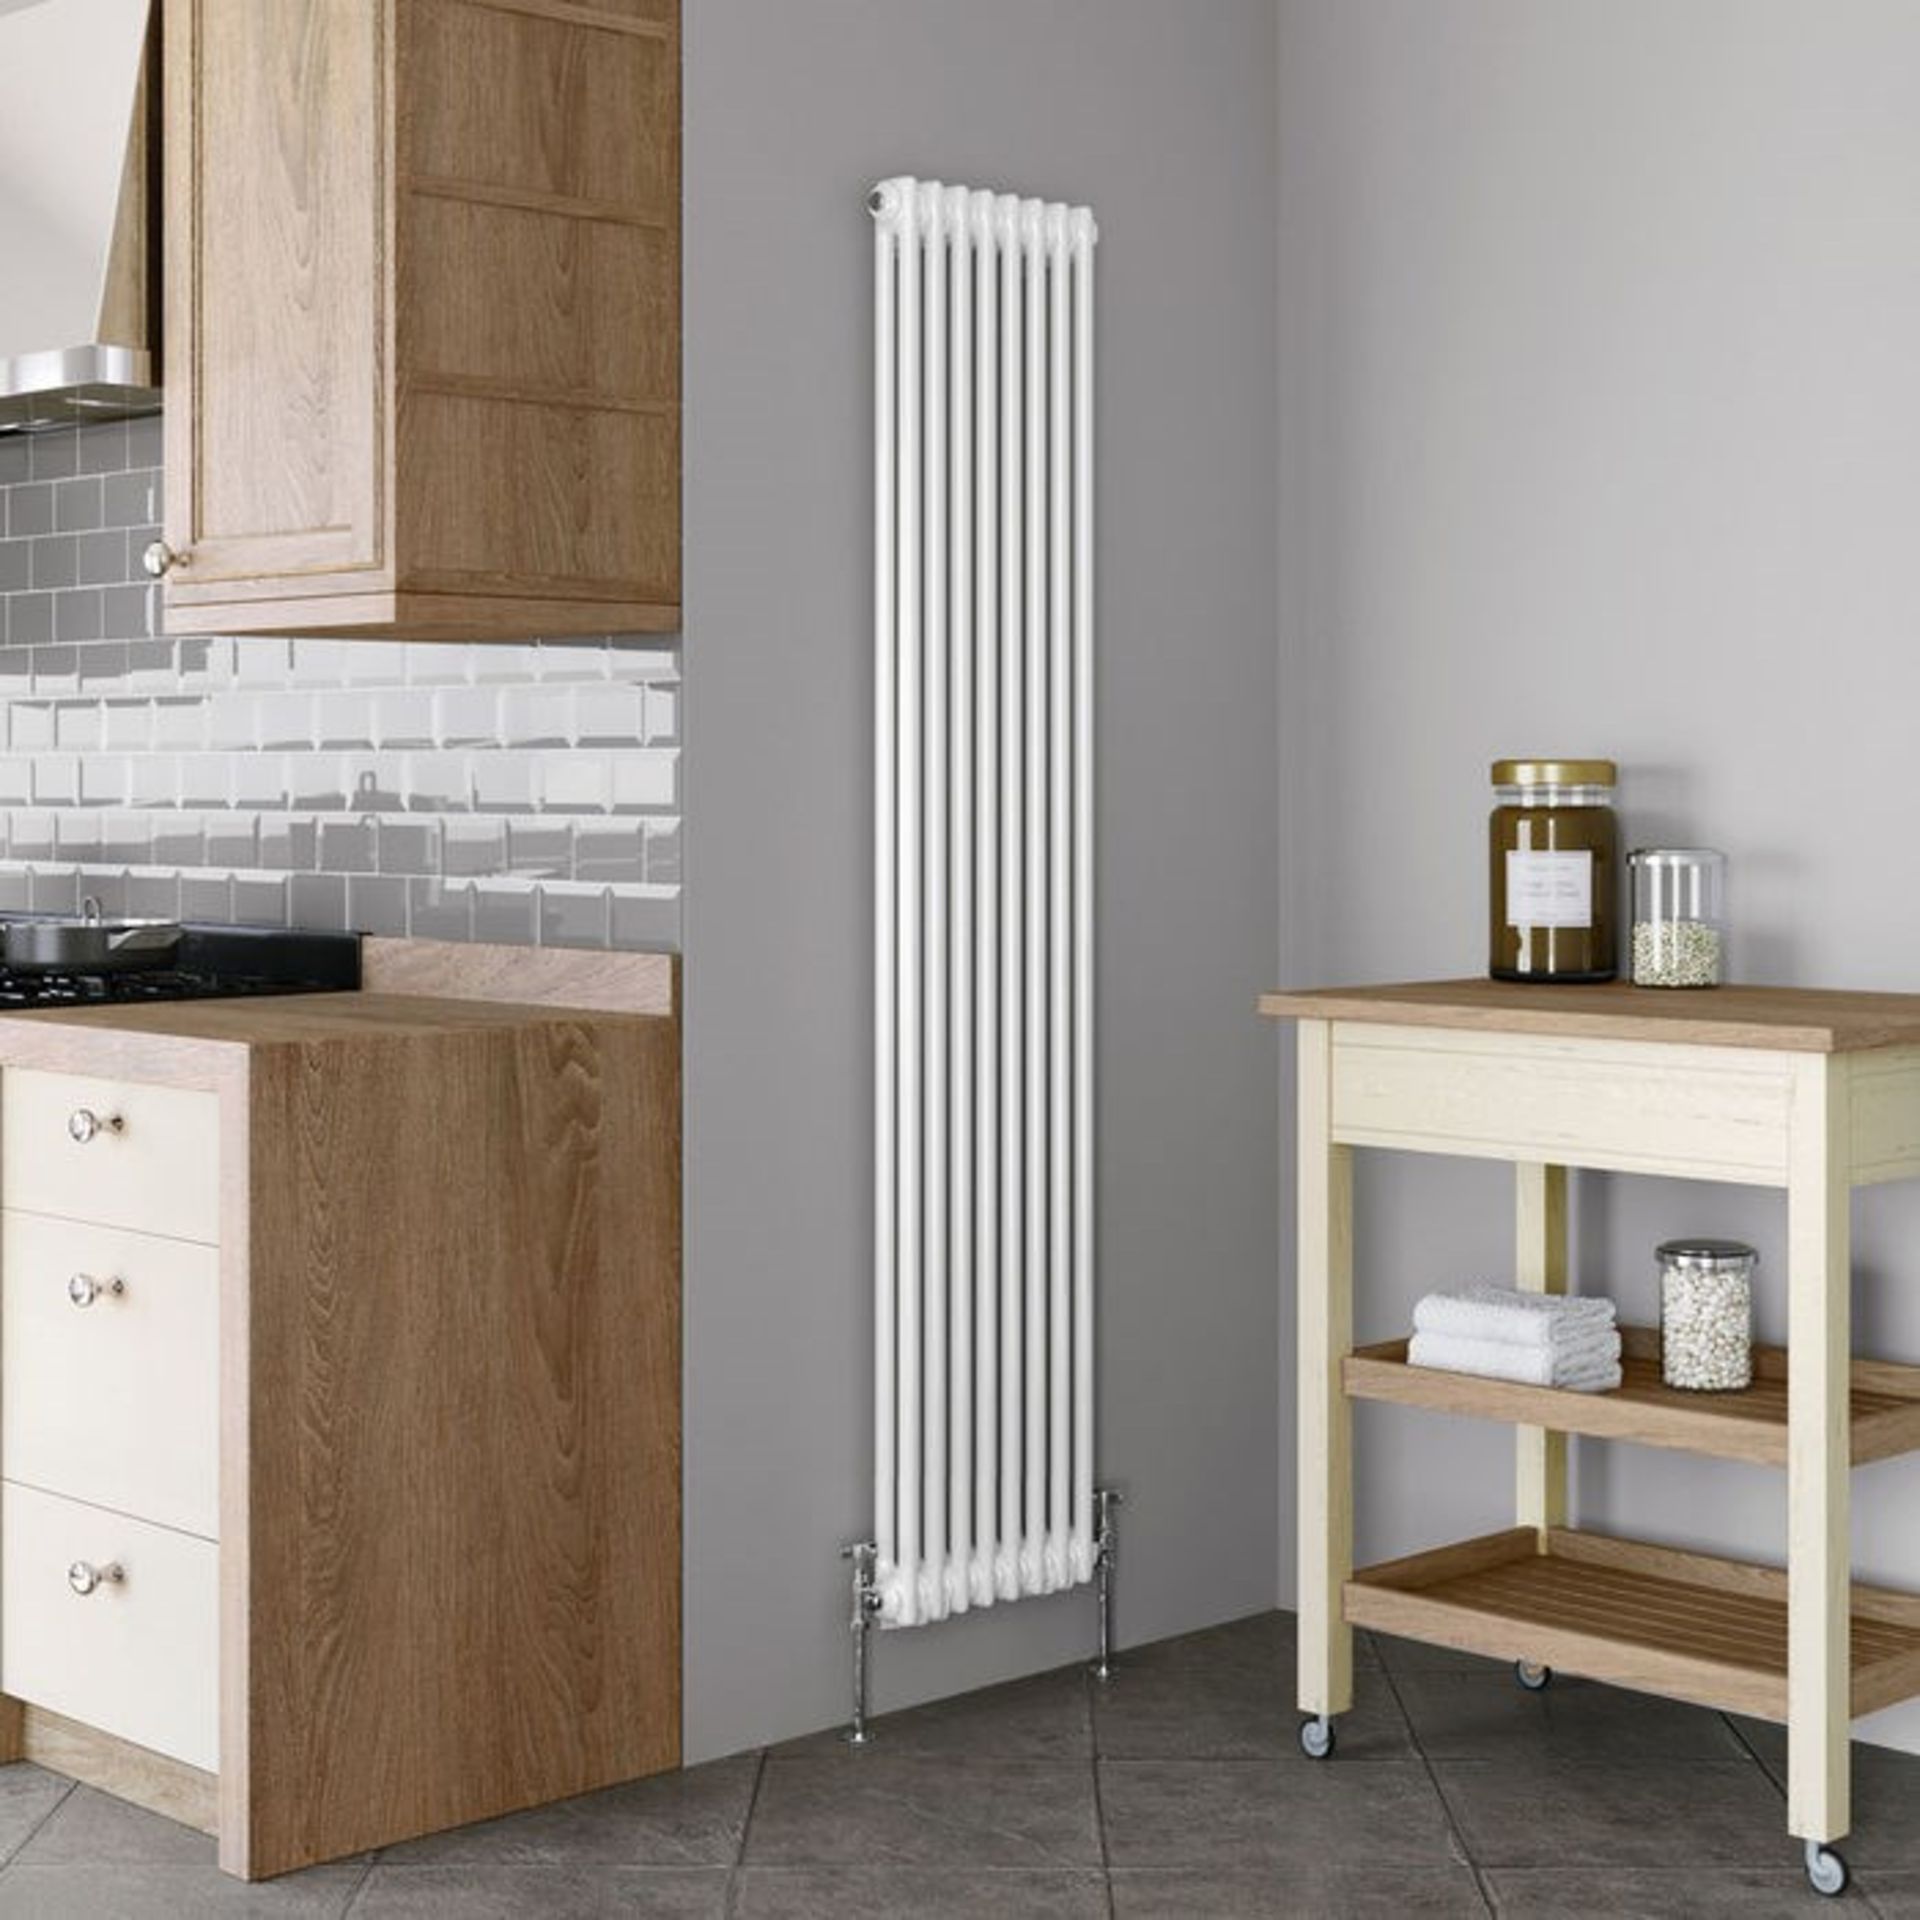 (JL83) 2000x490mm White Double Panel Vertical Colosseum Traditional Radiator. RRP £528.99.((JL83) - Image 3 of 3